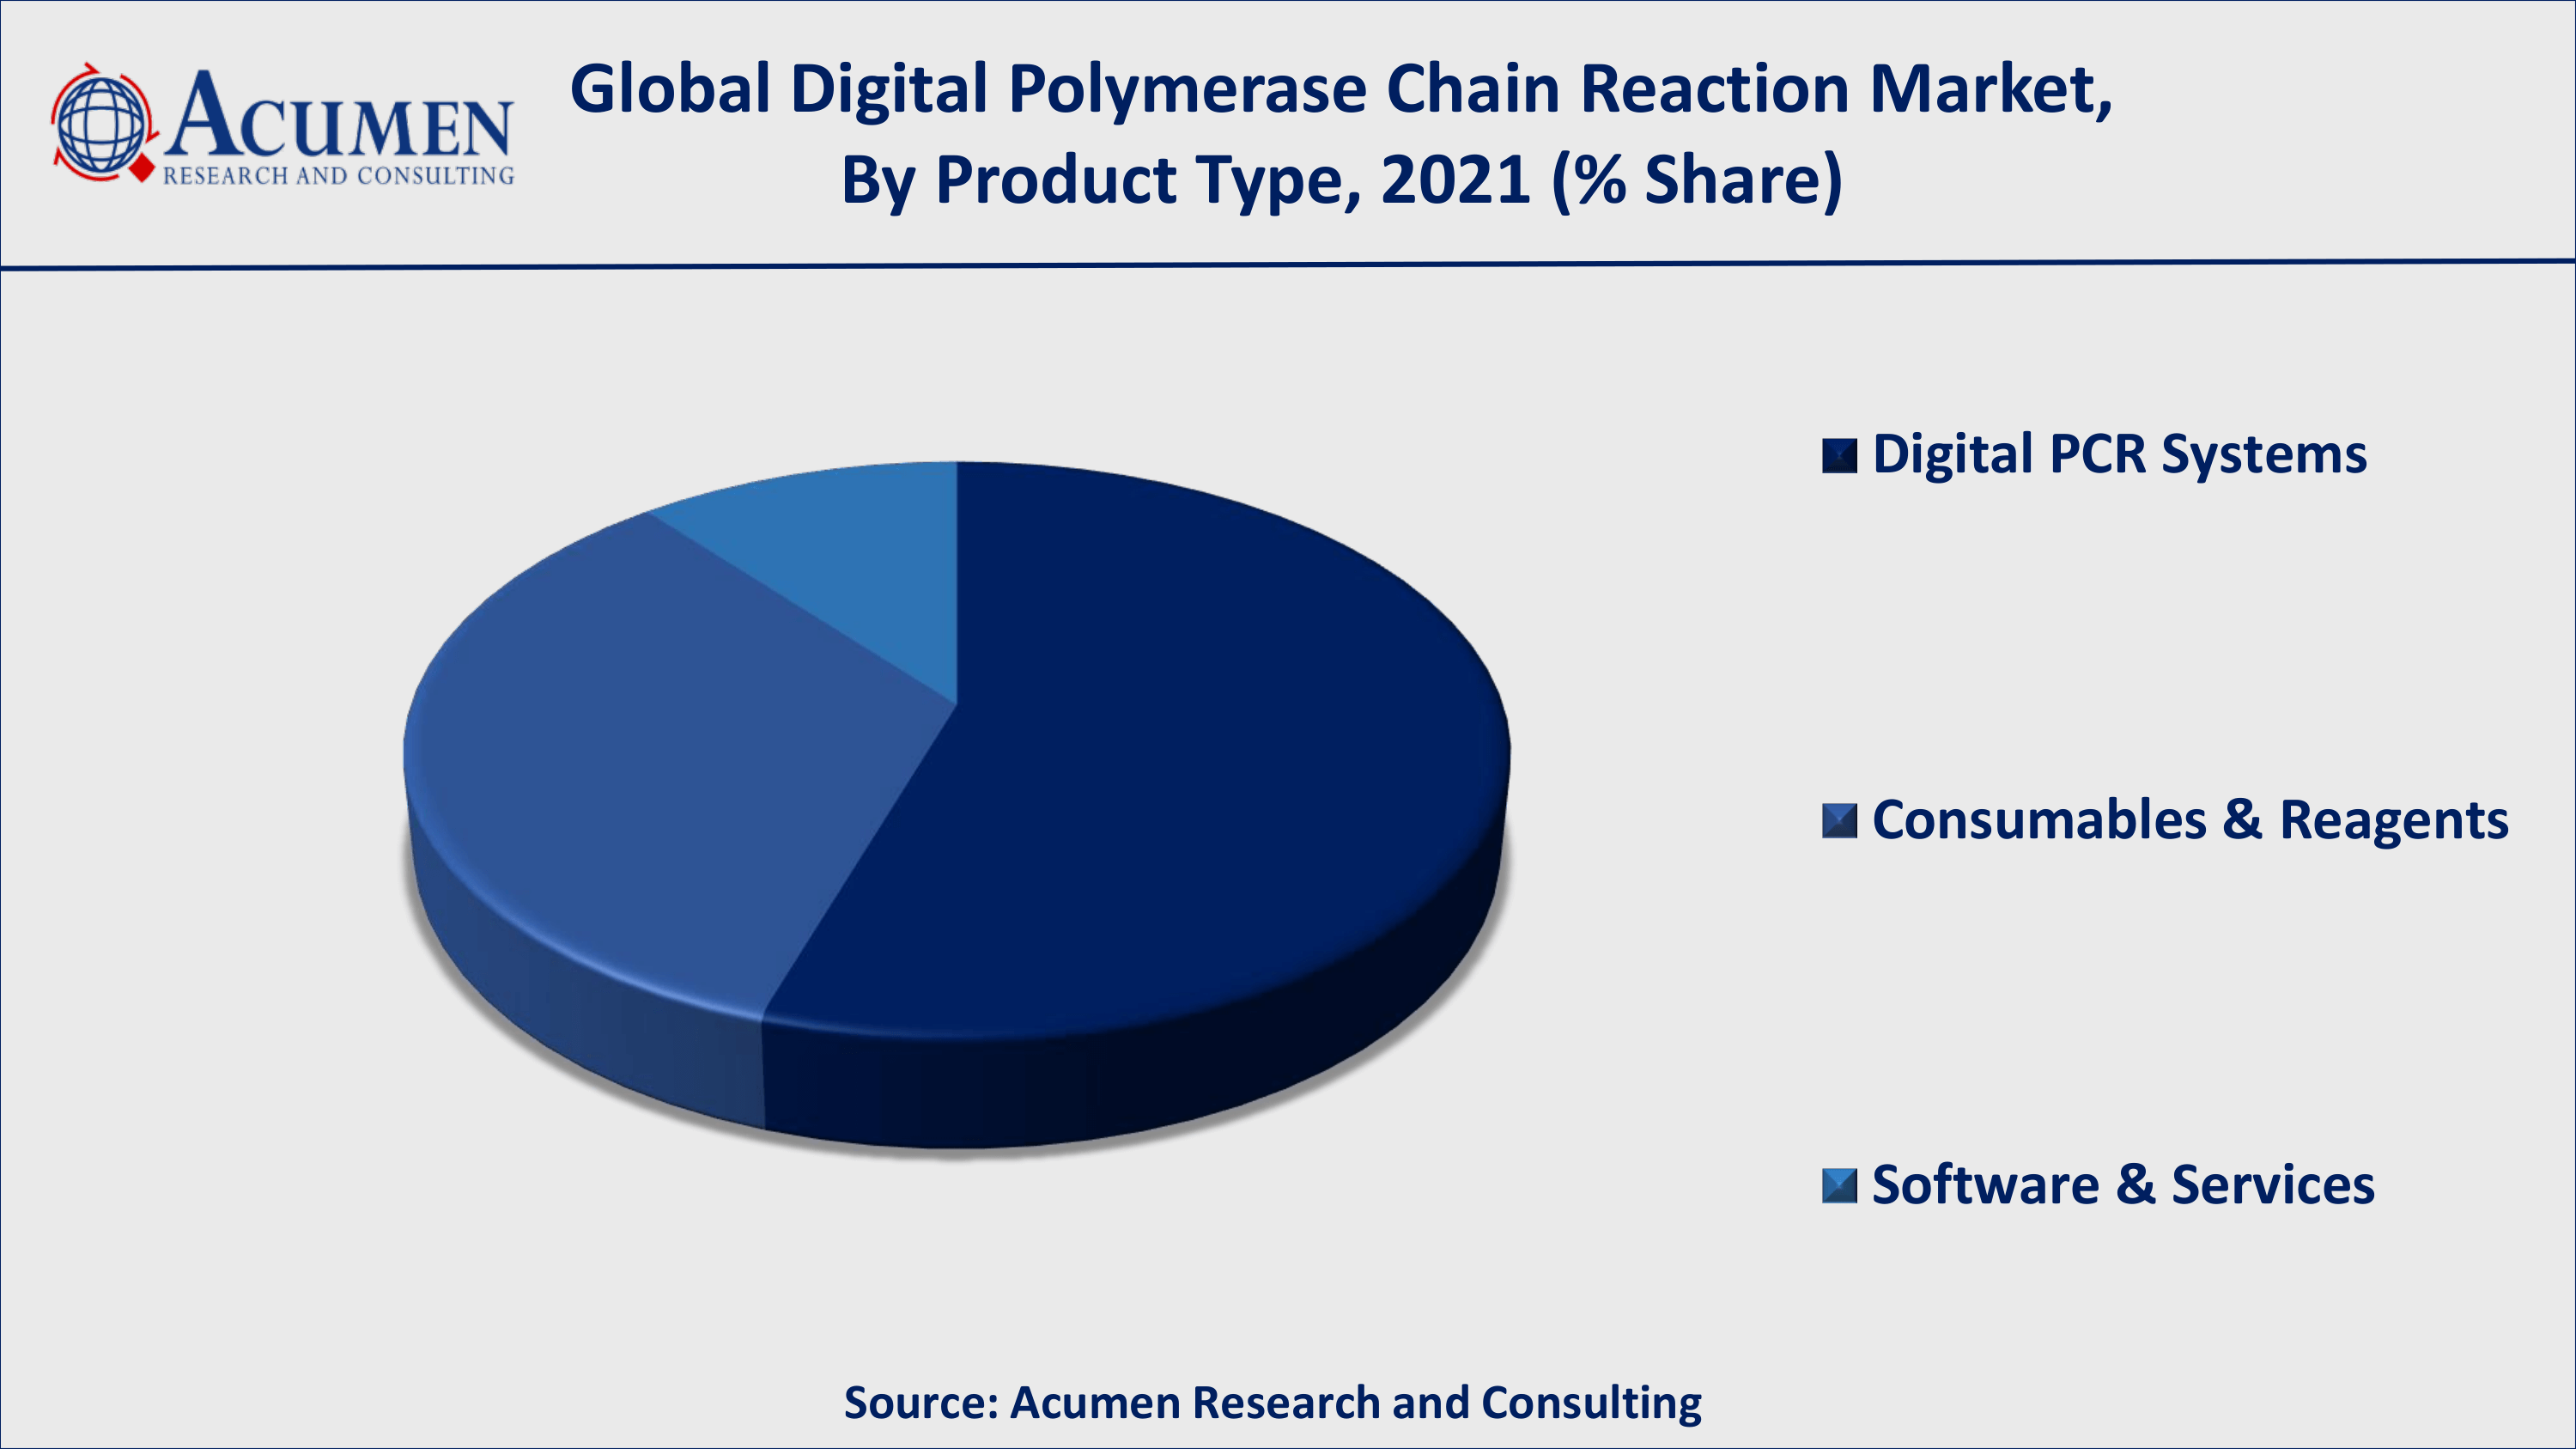 Asia-Pacific digital polymerase chain reaction market growth will register fastest CAGR from 2022 to 2030